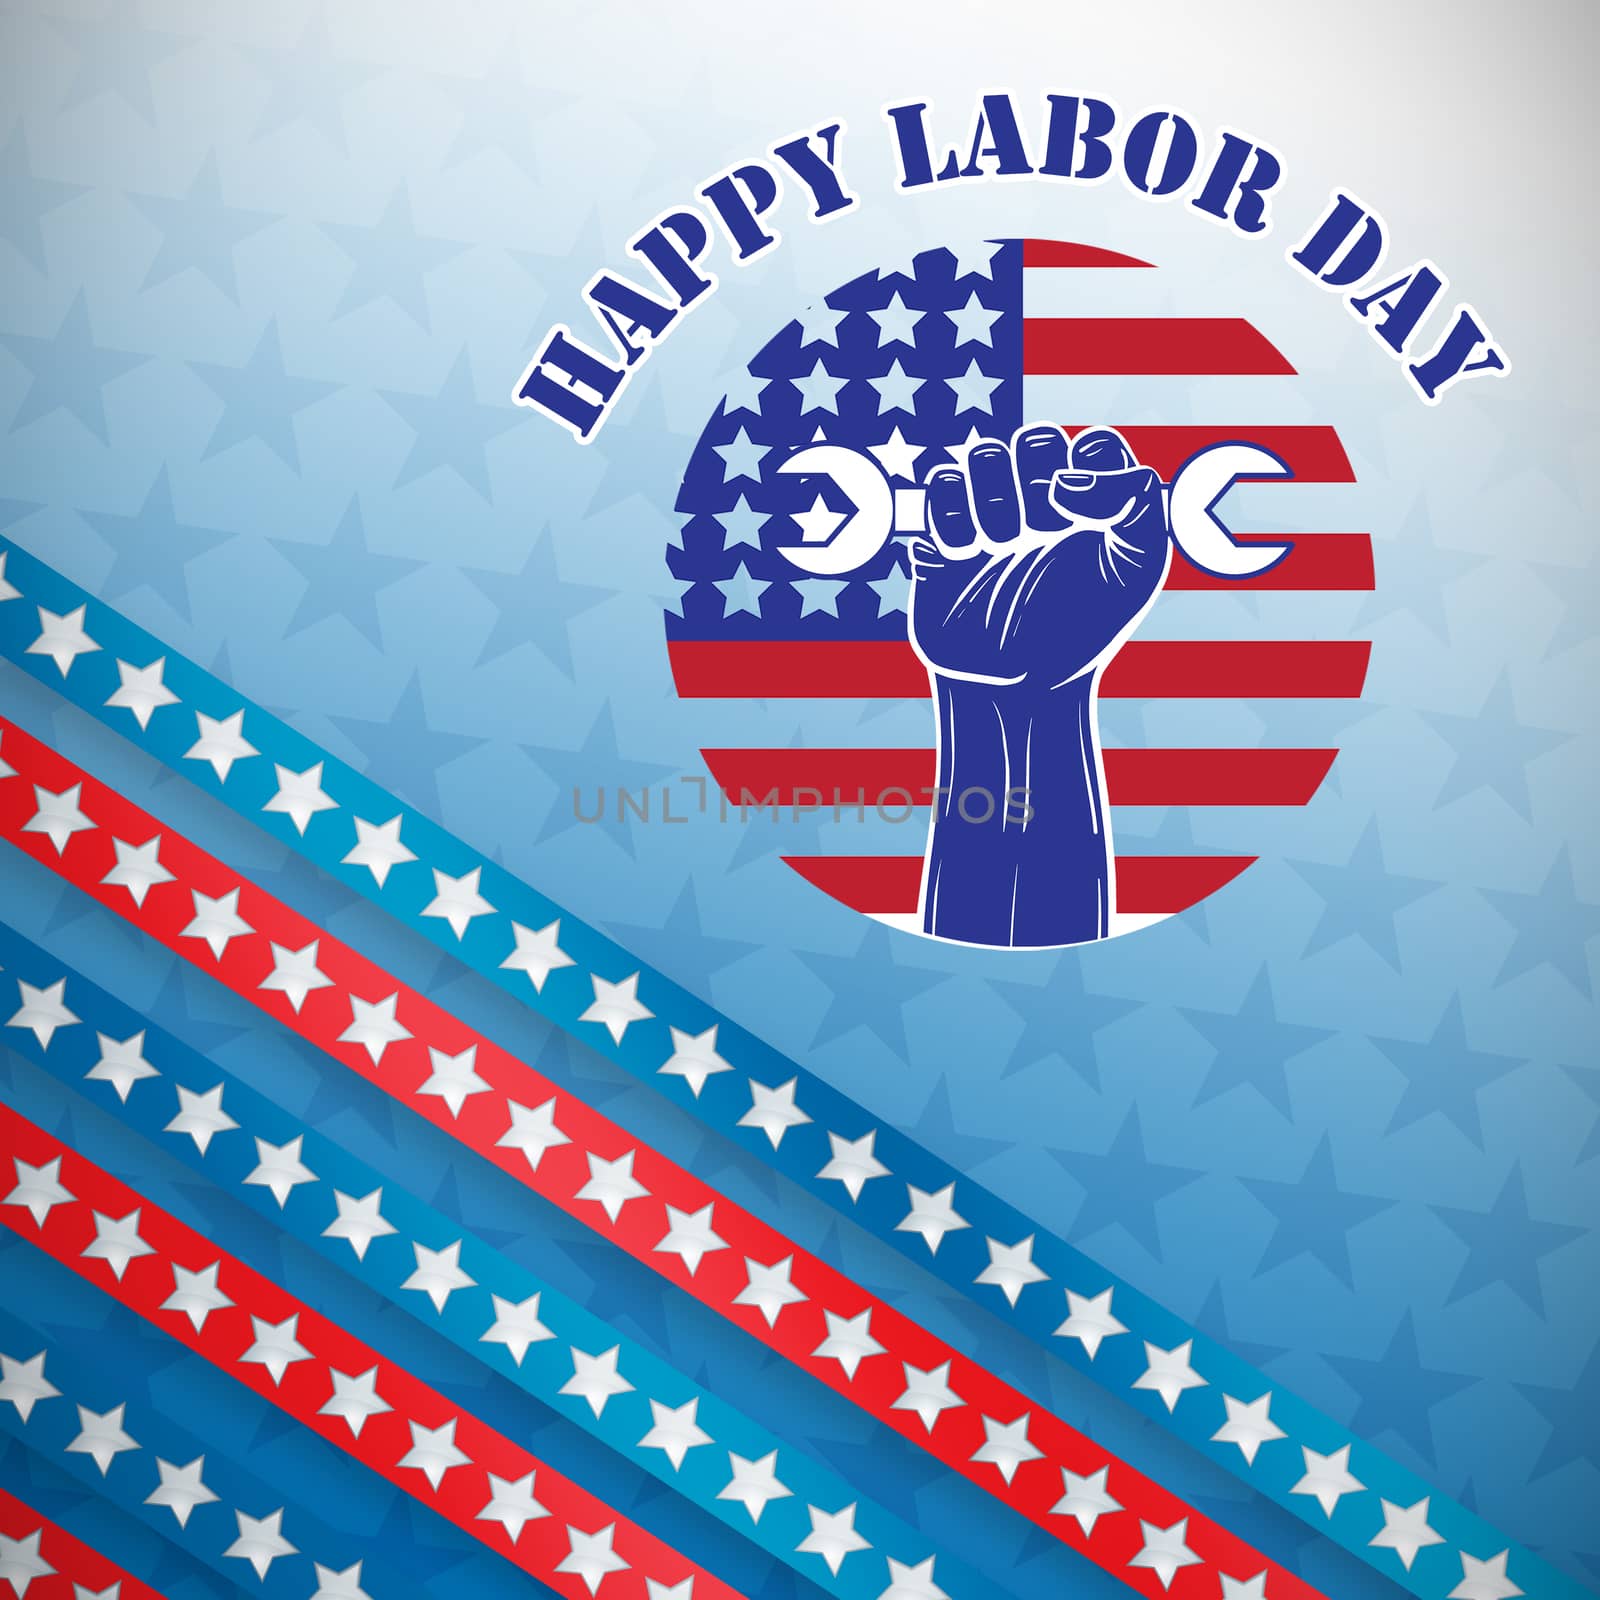 Composite image of happy labor day text over cropped hand holding tools by Wavebreakmedia